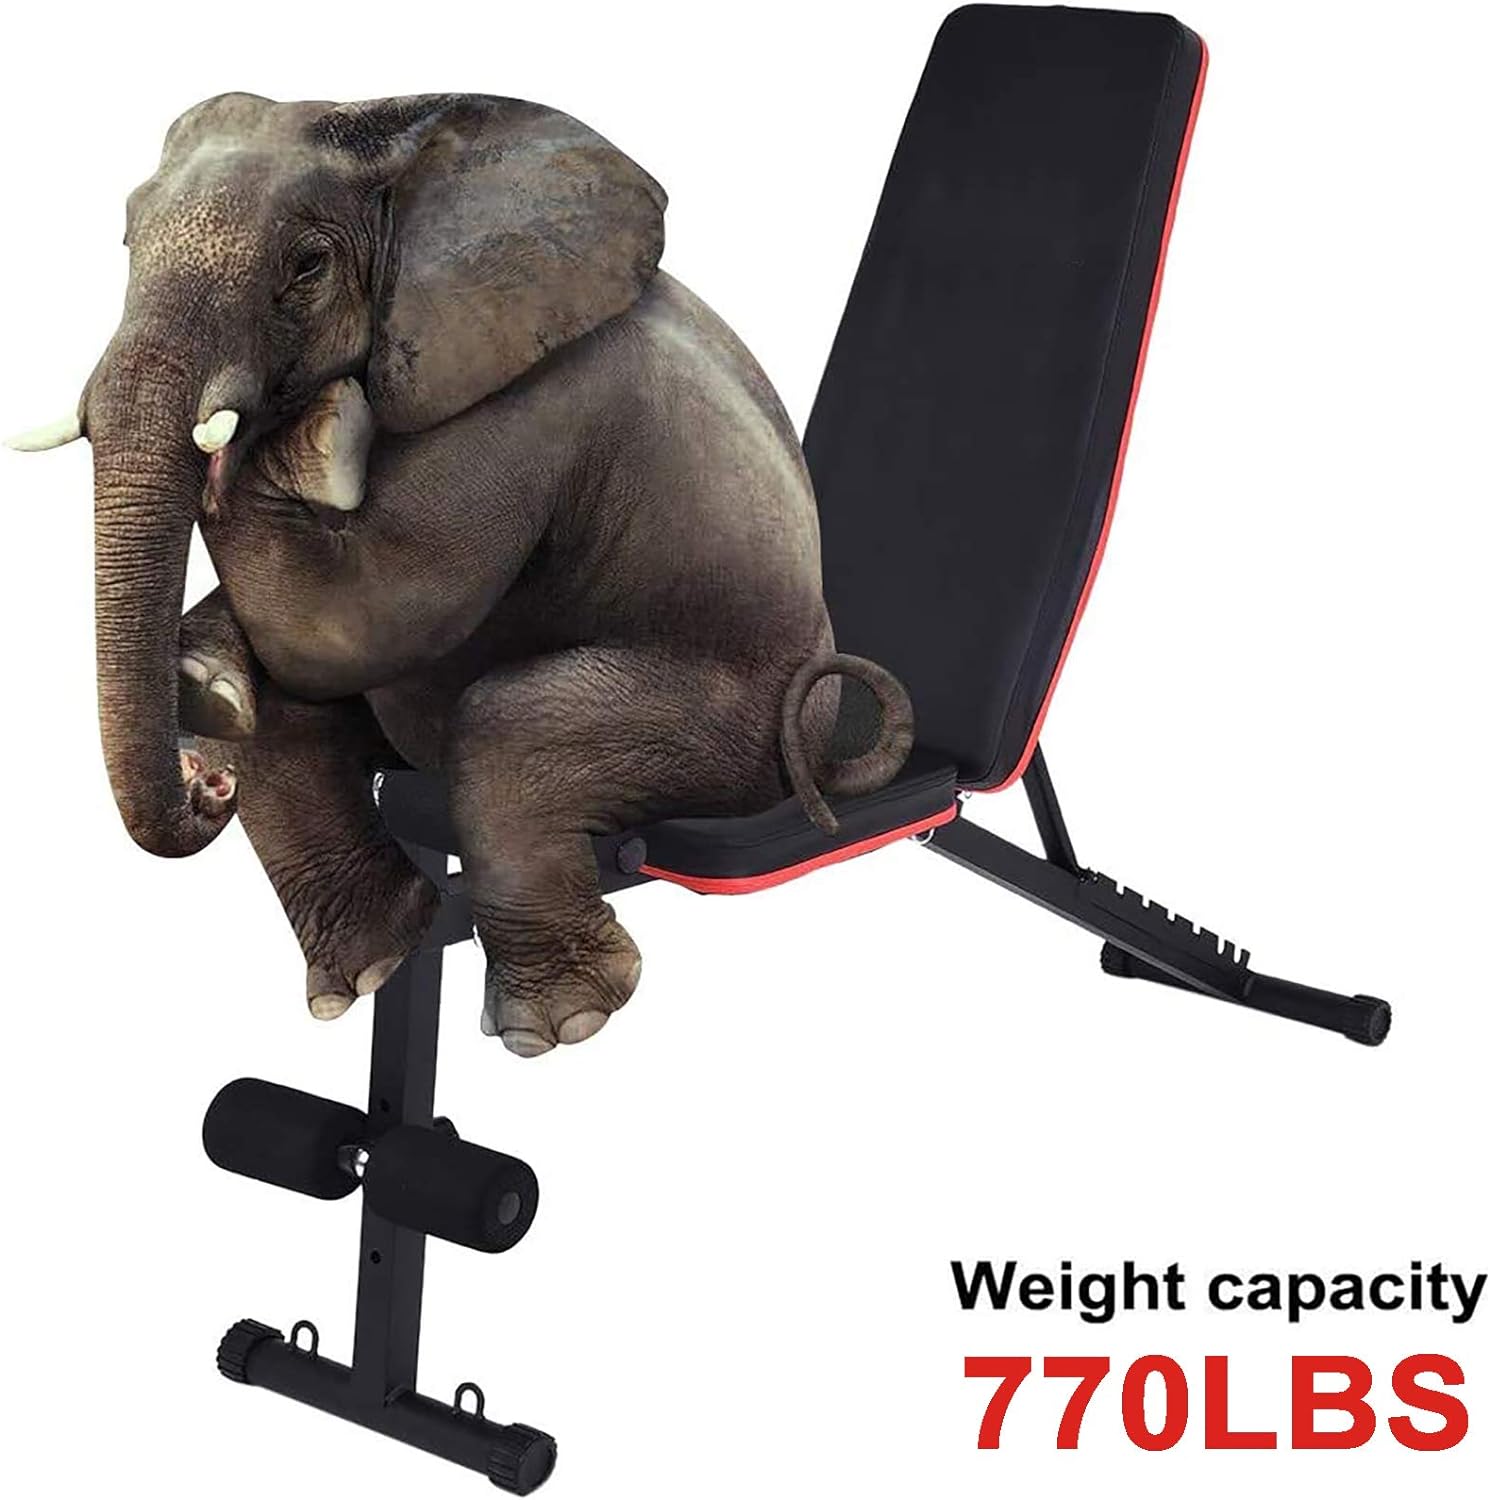 yizc adjustable weight benchroman chair sit up incline decline abs bench dumbbell benchfoldable full body workout bench 1 4 1